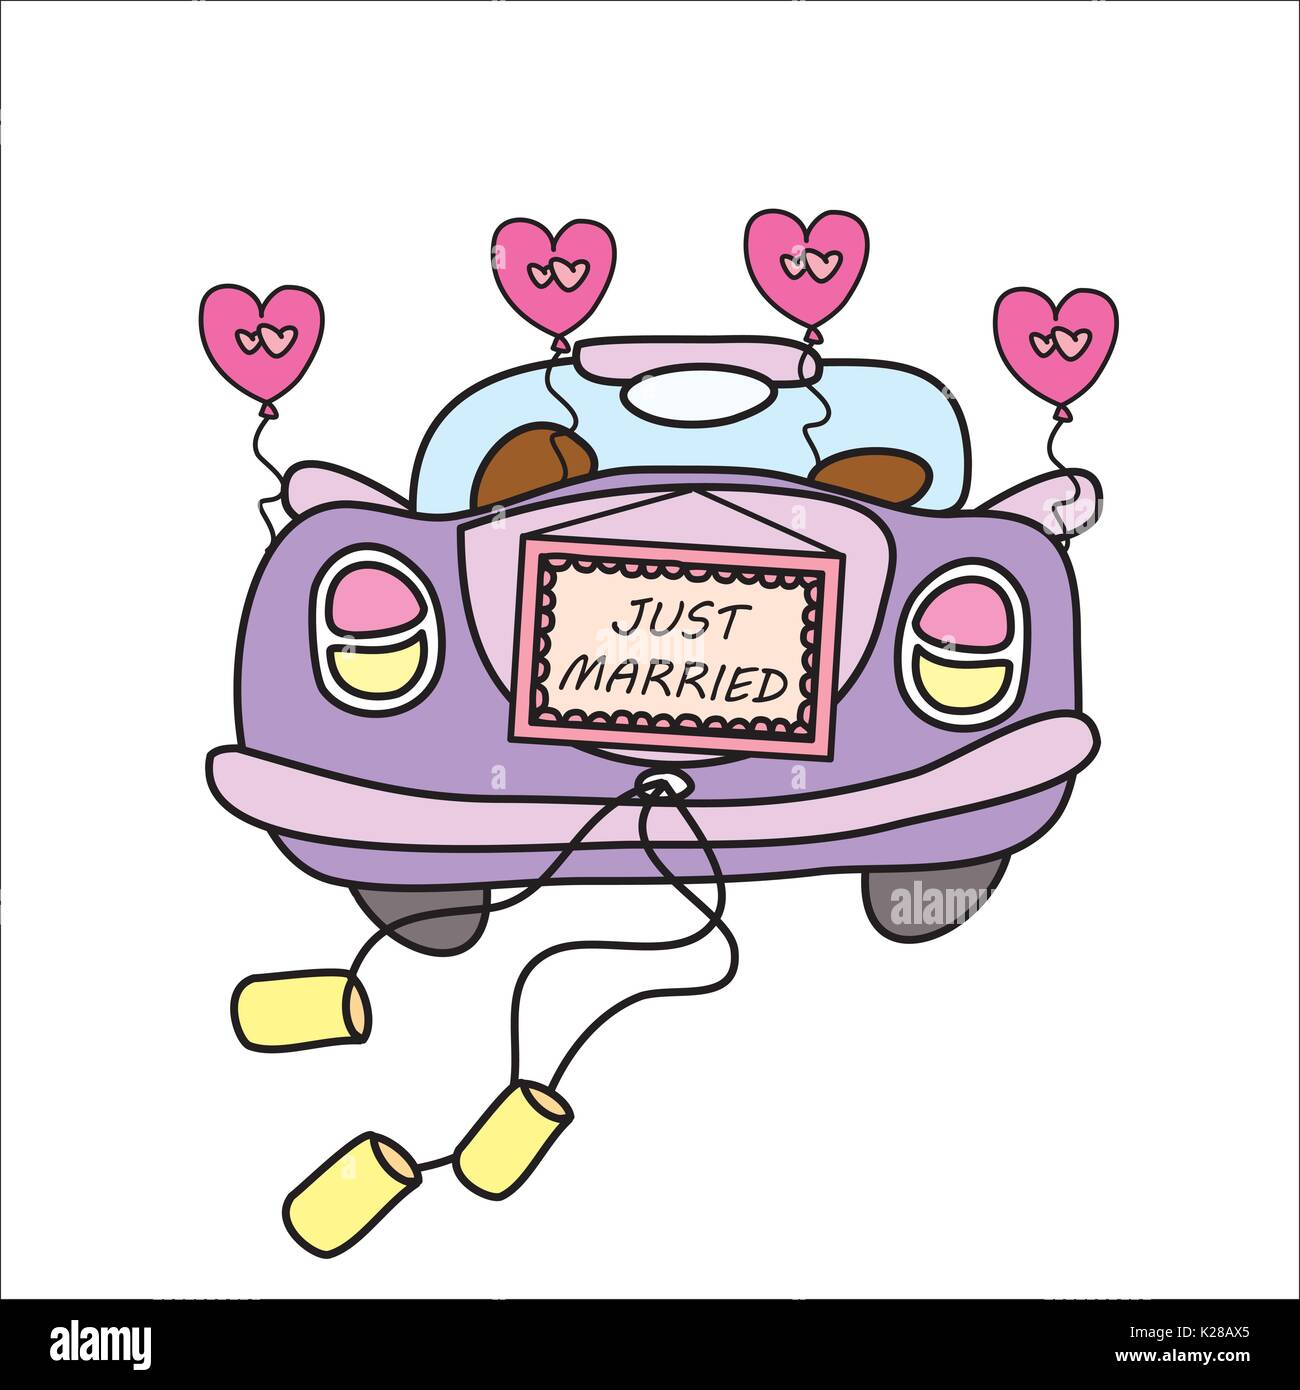 Ongekend wedding car,just married, doodle hand drawn, vector illustration ZF-71